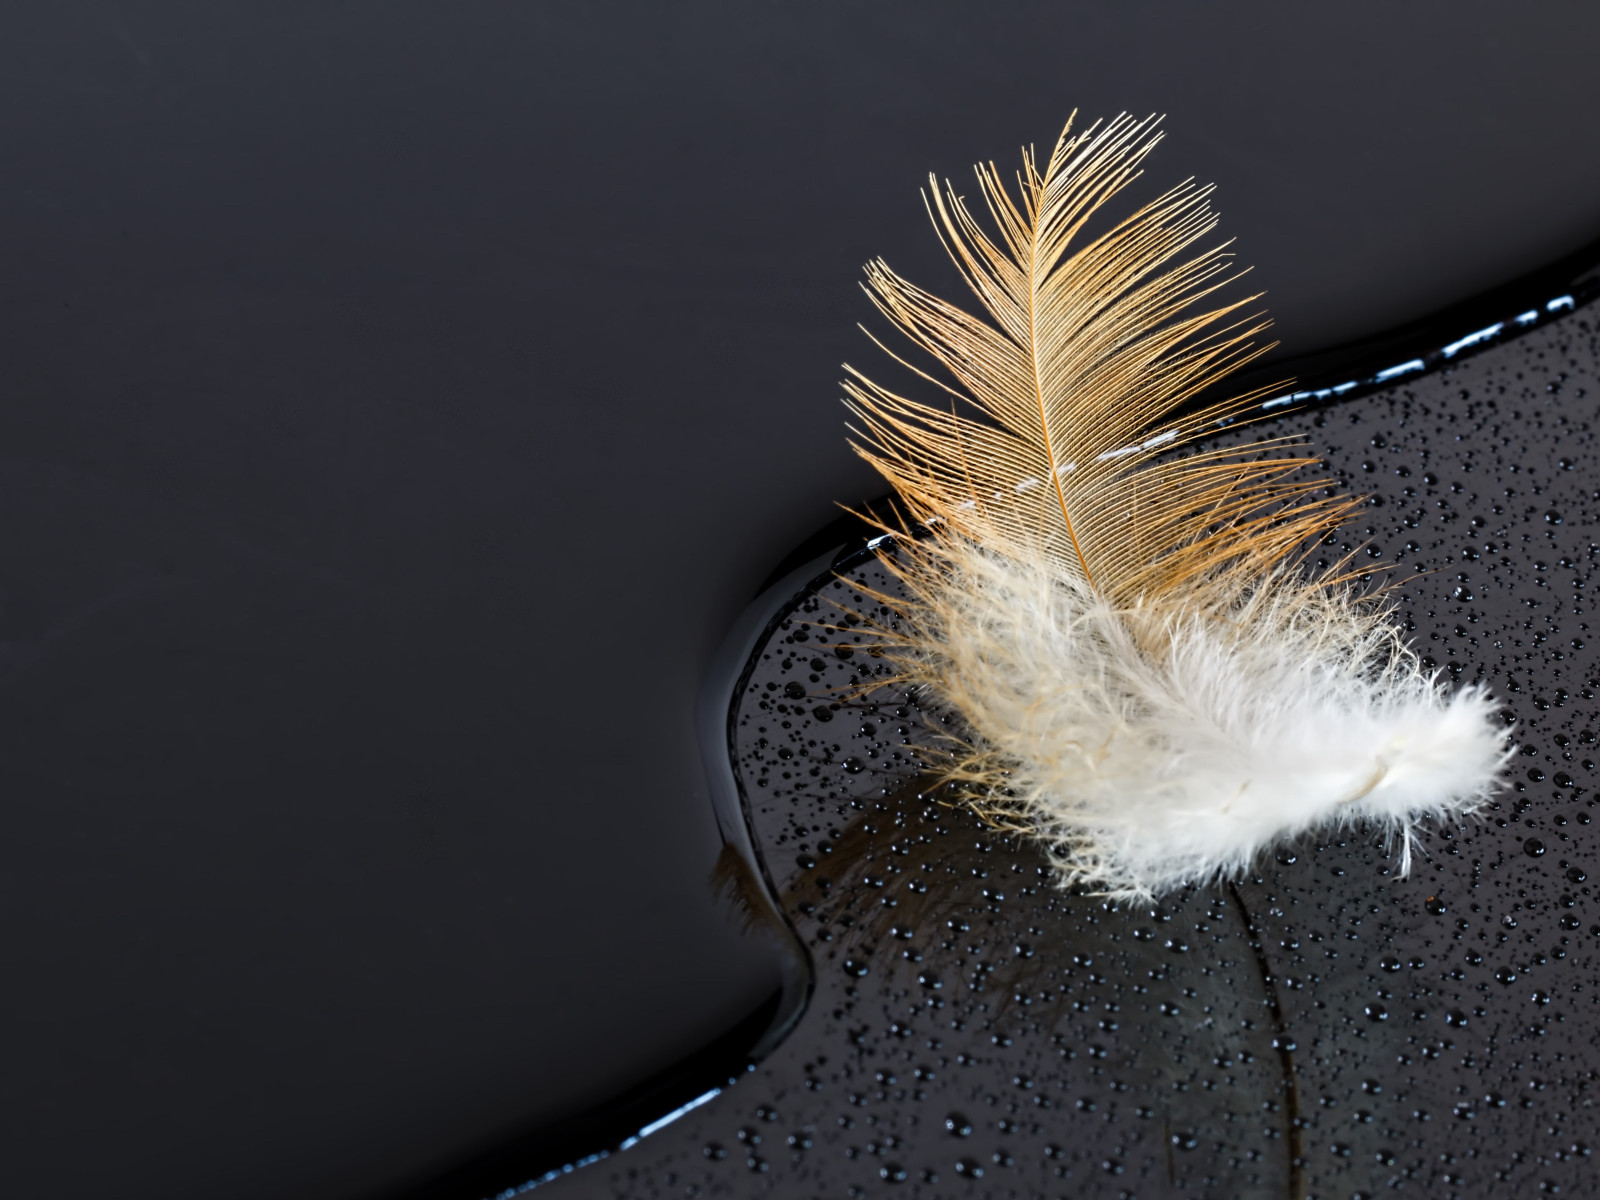 Dark surface with a feather on water wallpaper 1600x1200